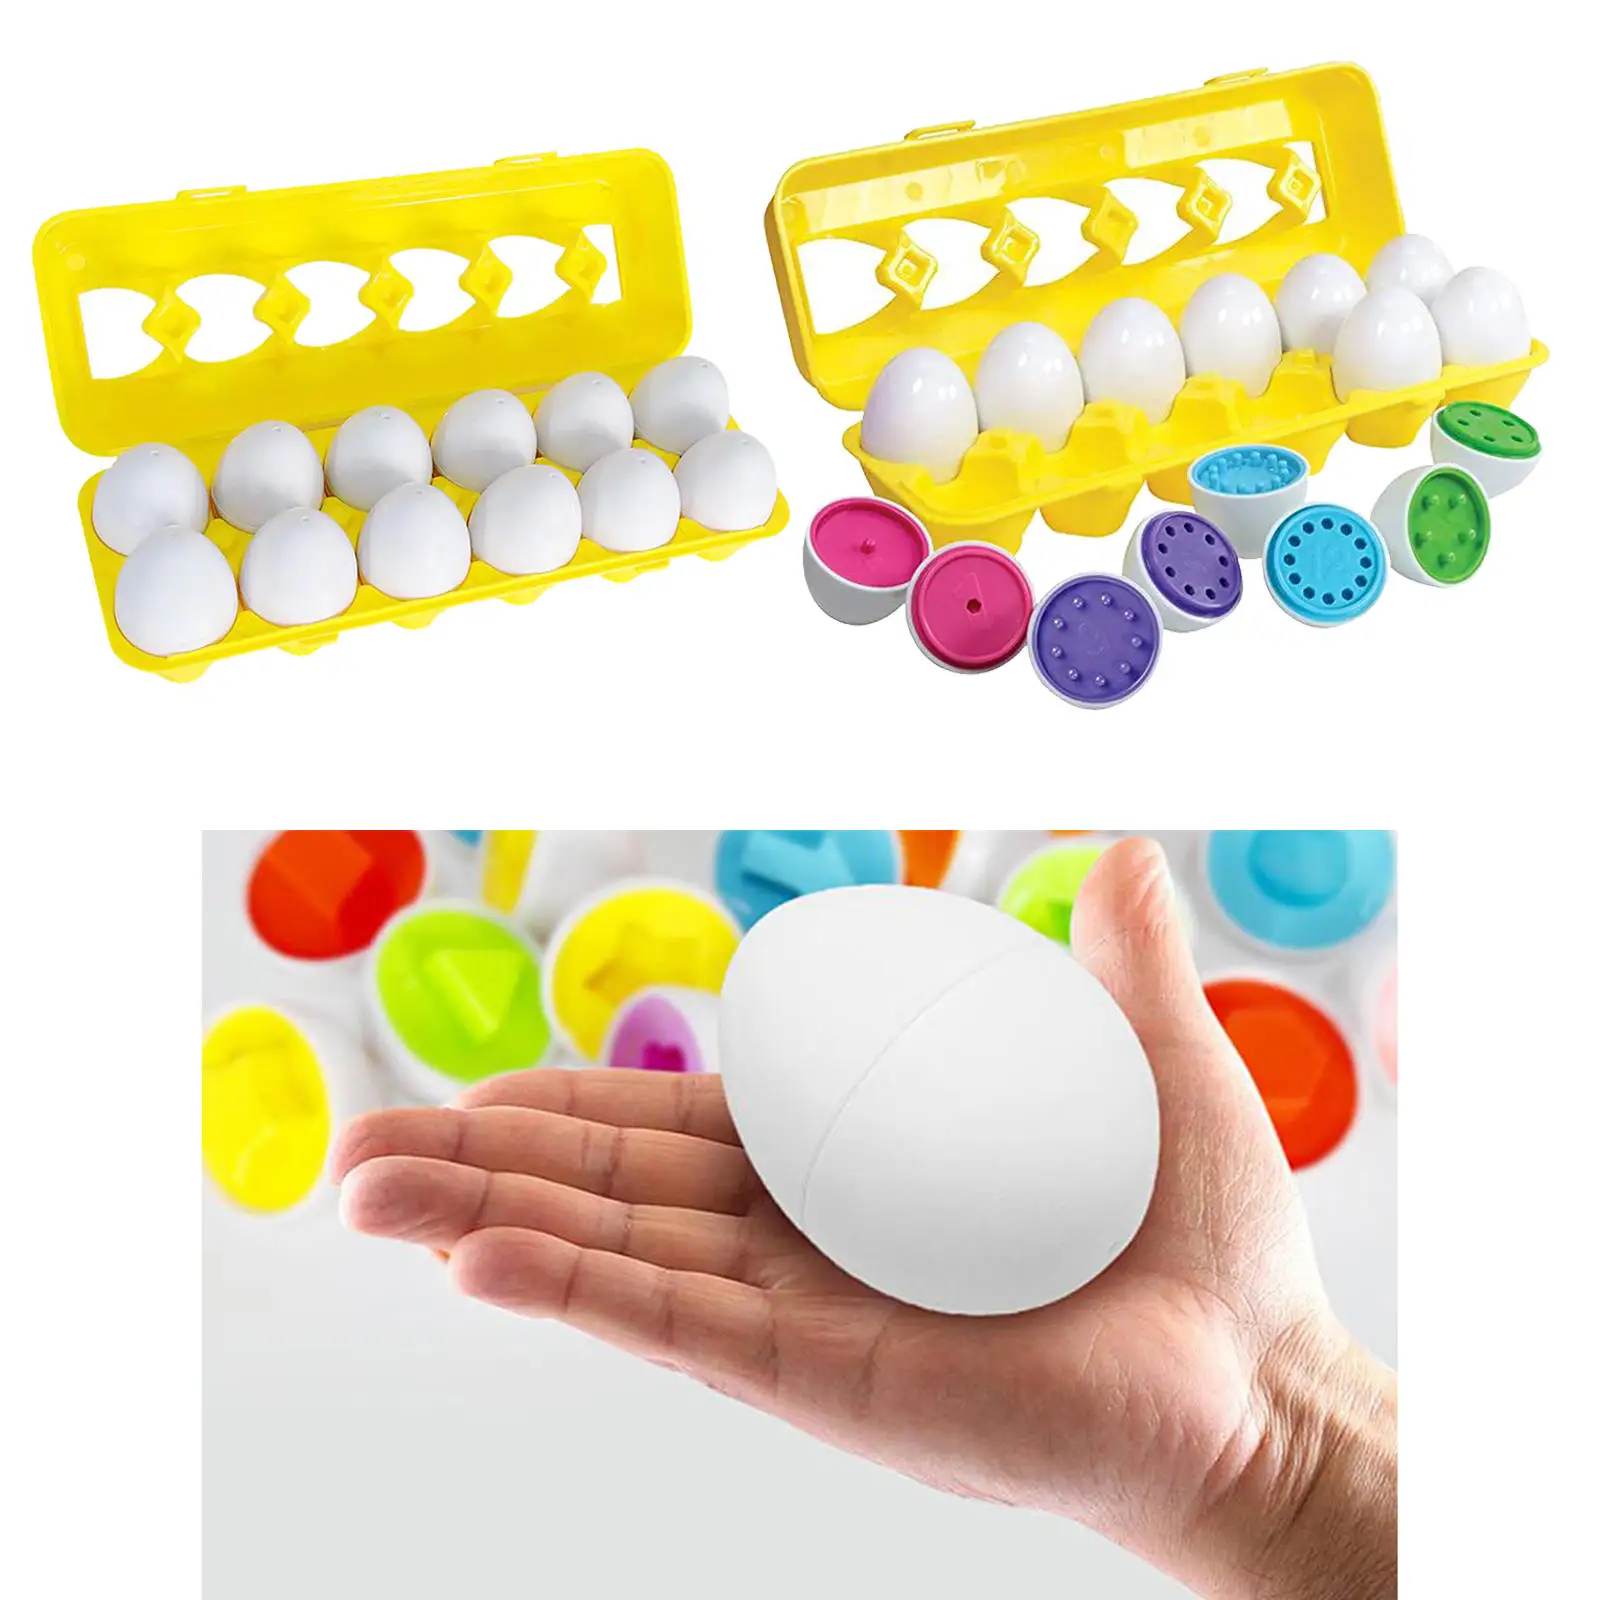 Educational toy recognize color shape matching count match egg fight inserted toys kids toddler toys puzzle